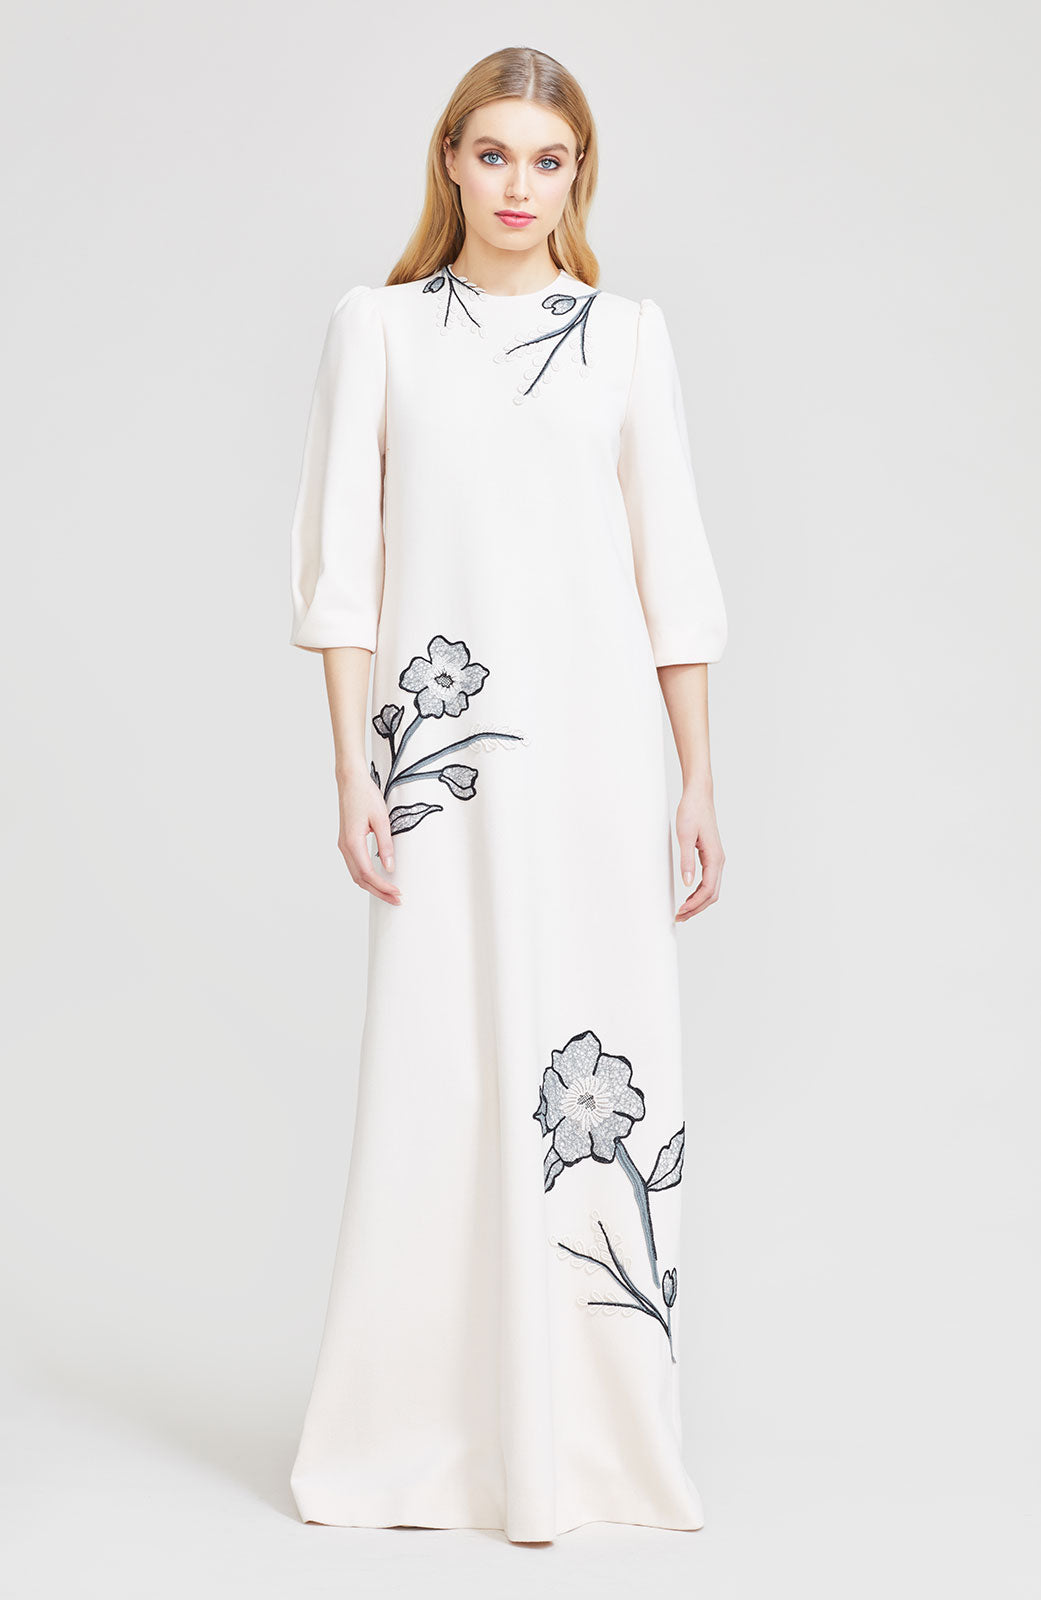 lela rose evening gowns